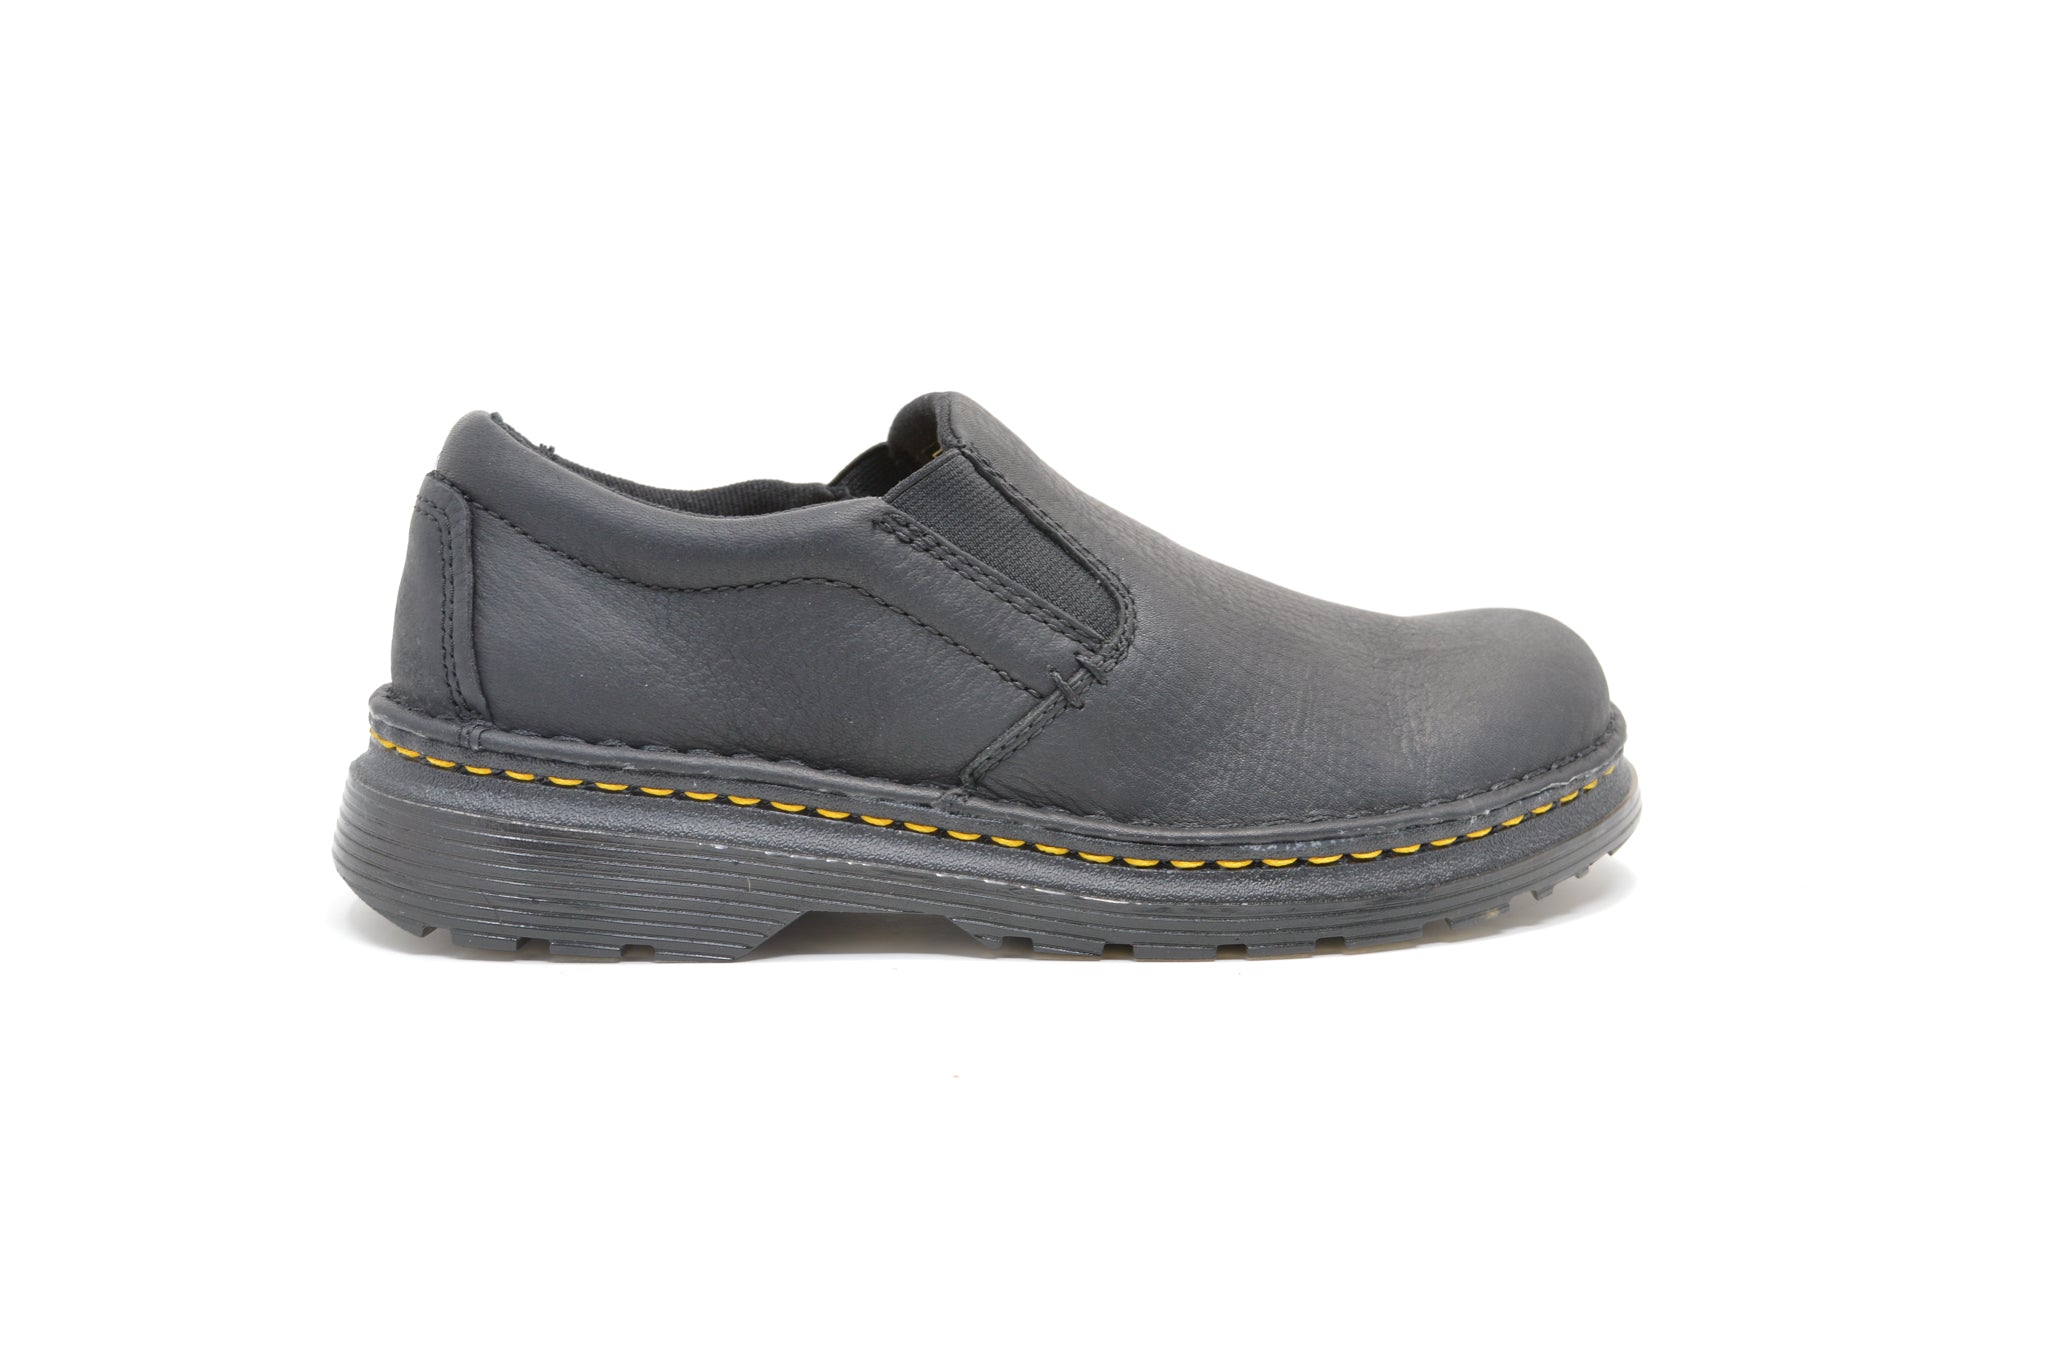 DR. MARTENS Boyle Grizzly